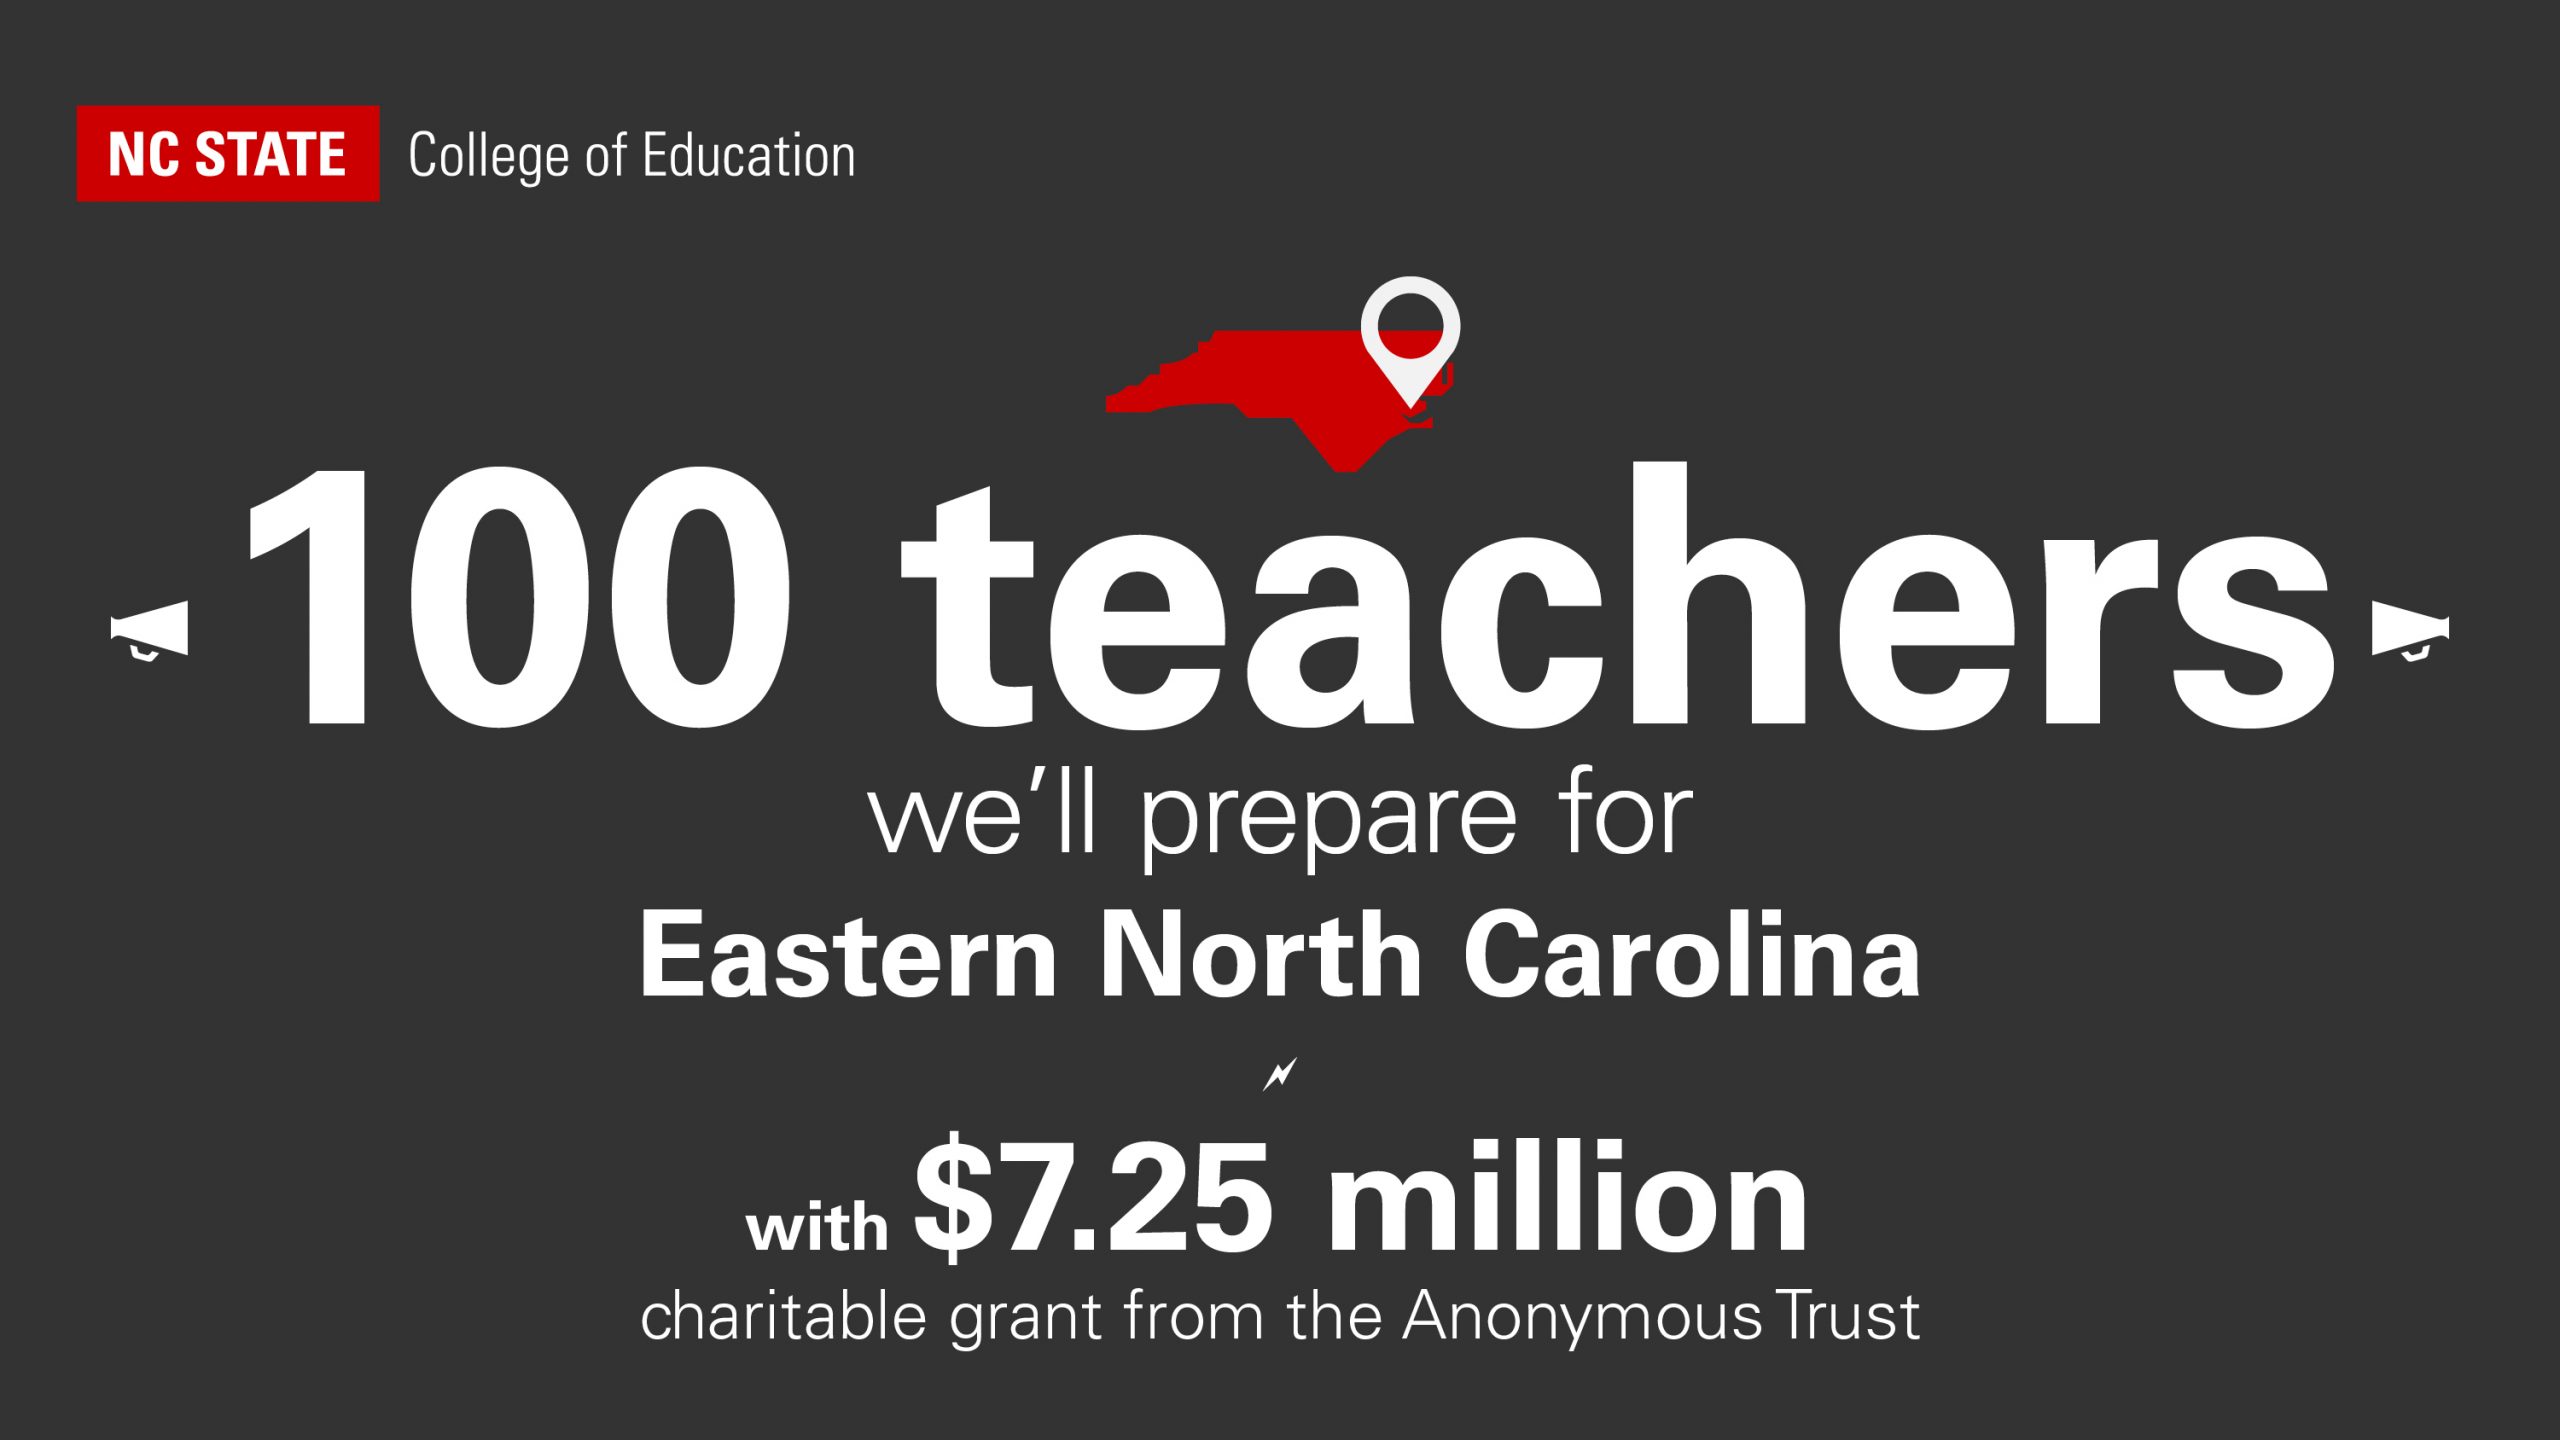 NC State will prepare 100 teachers for Eastern North Carolina with a grant from the Anonymous Trust